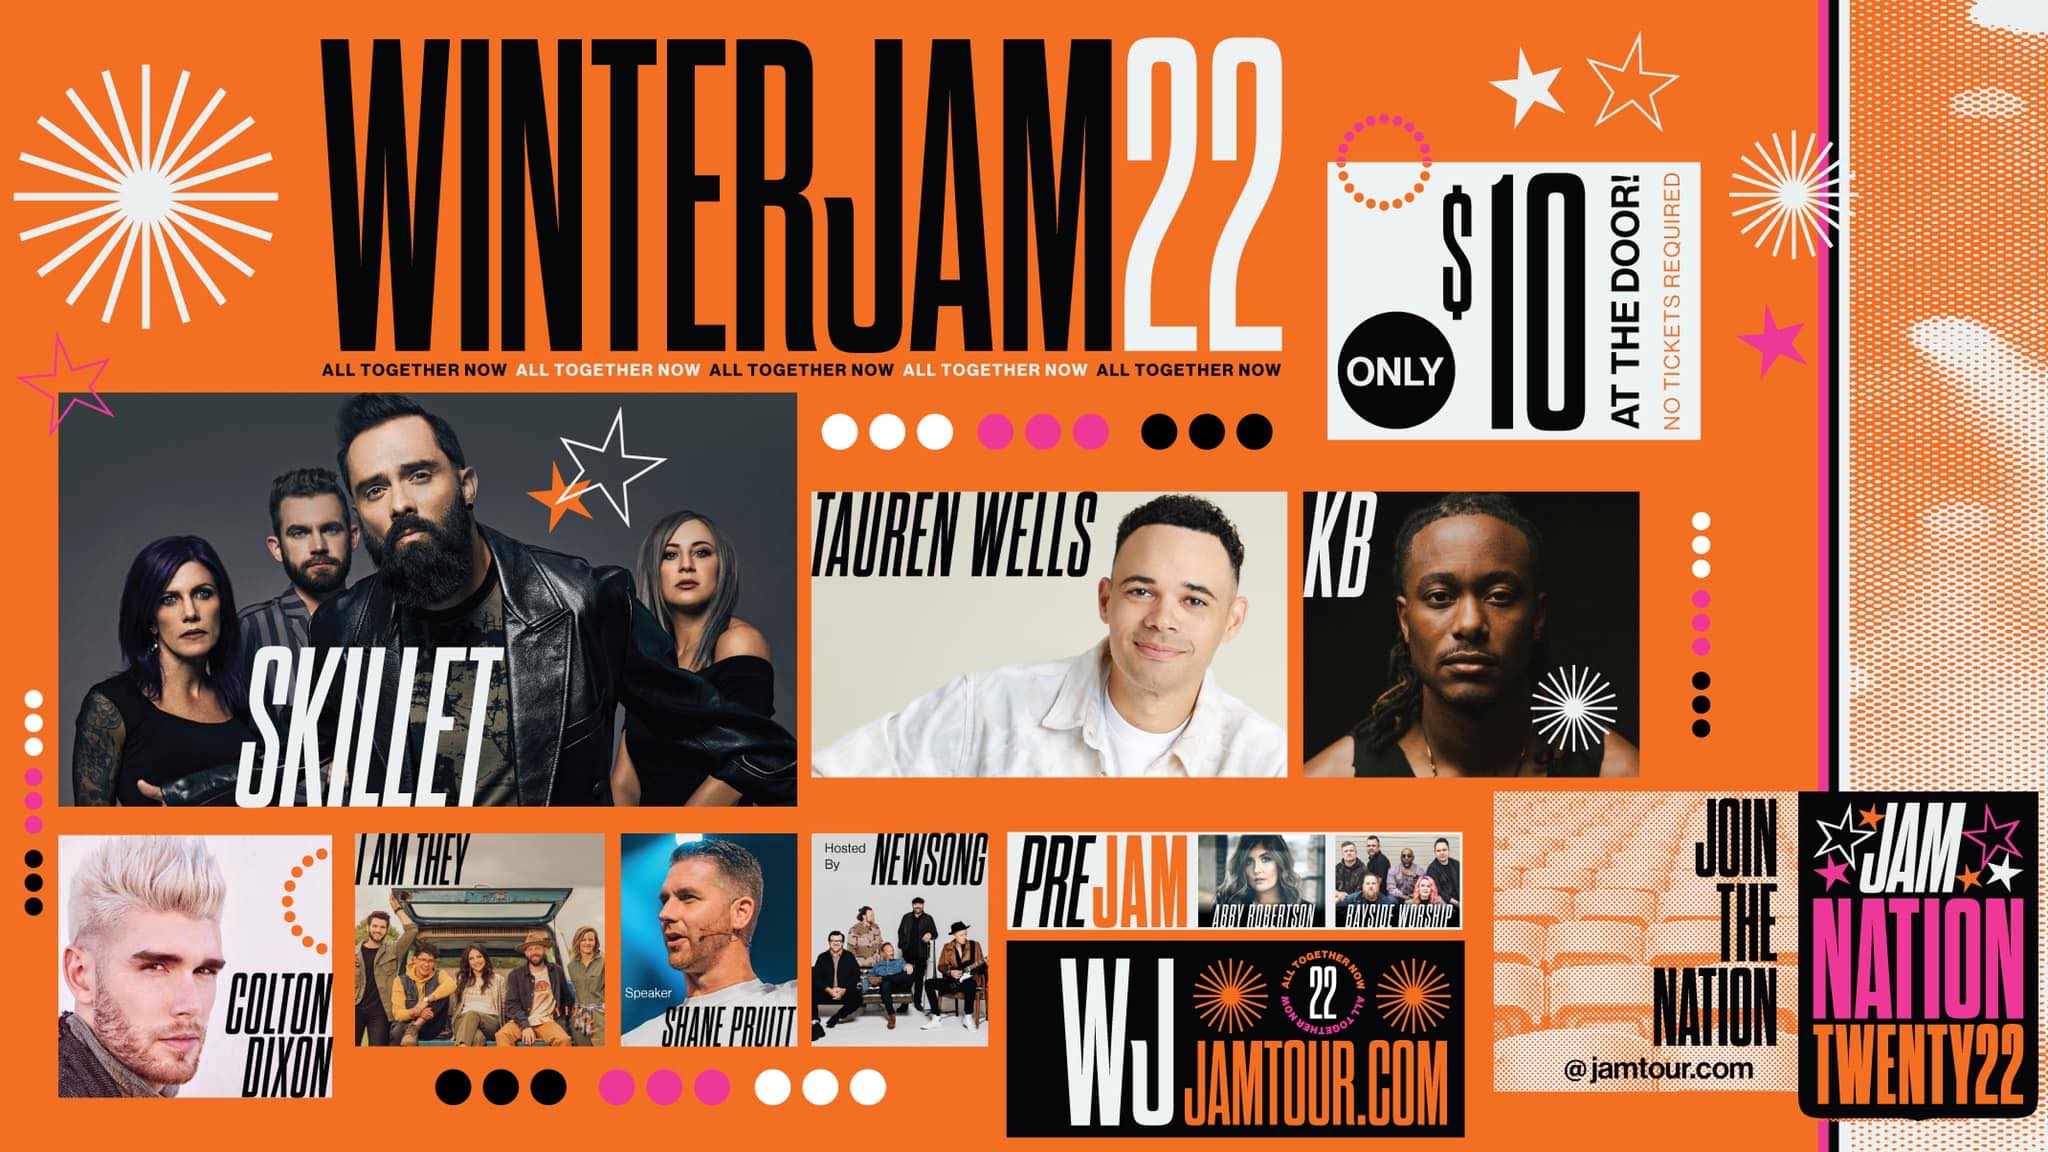 Winter Jam 22 Coming To AMALIE Arena Featuring Skillet, Wells & NewSong